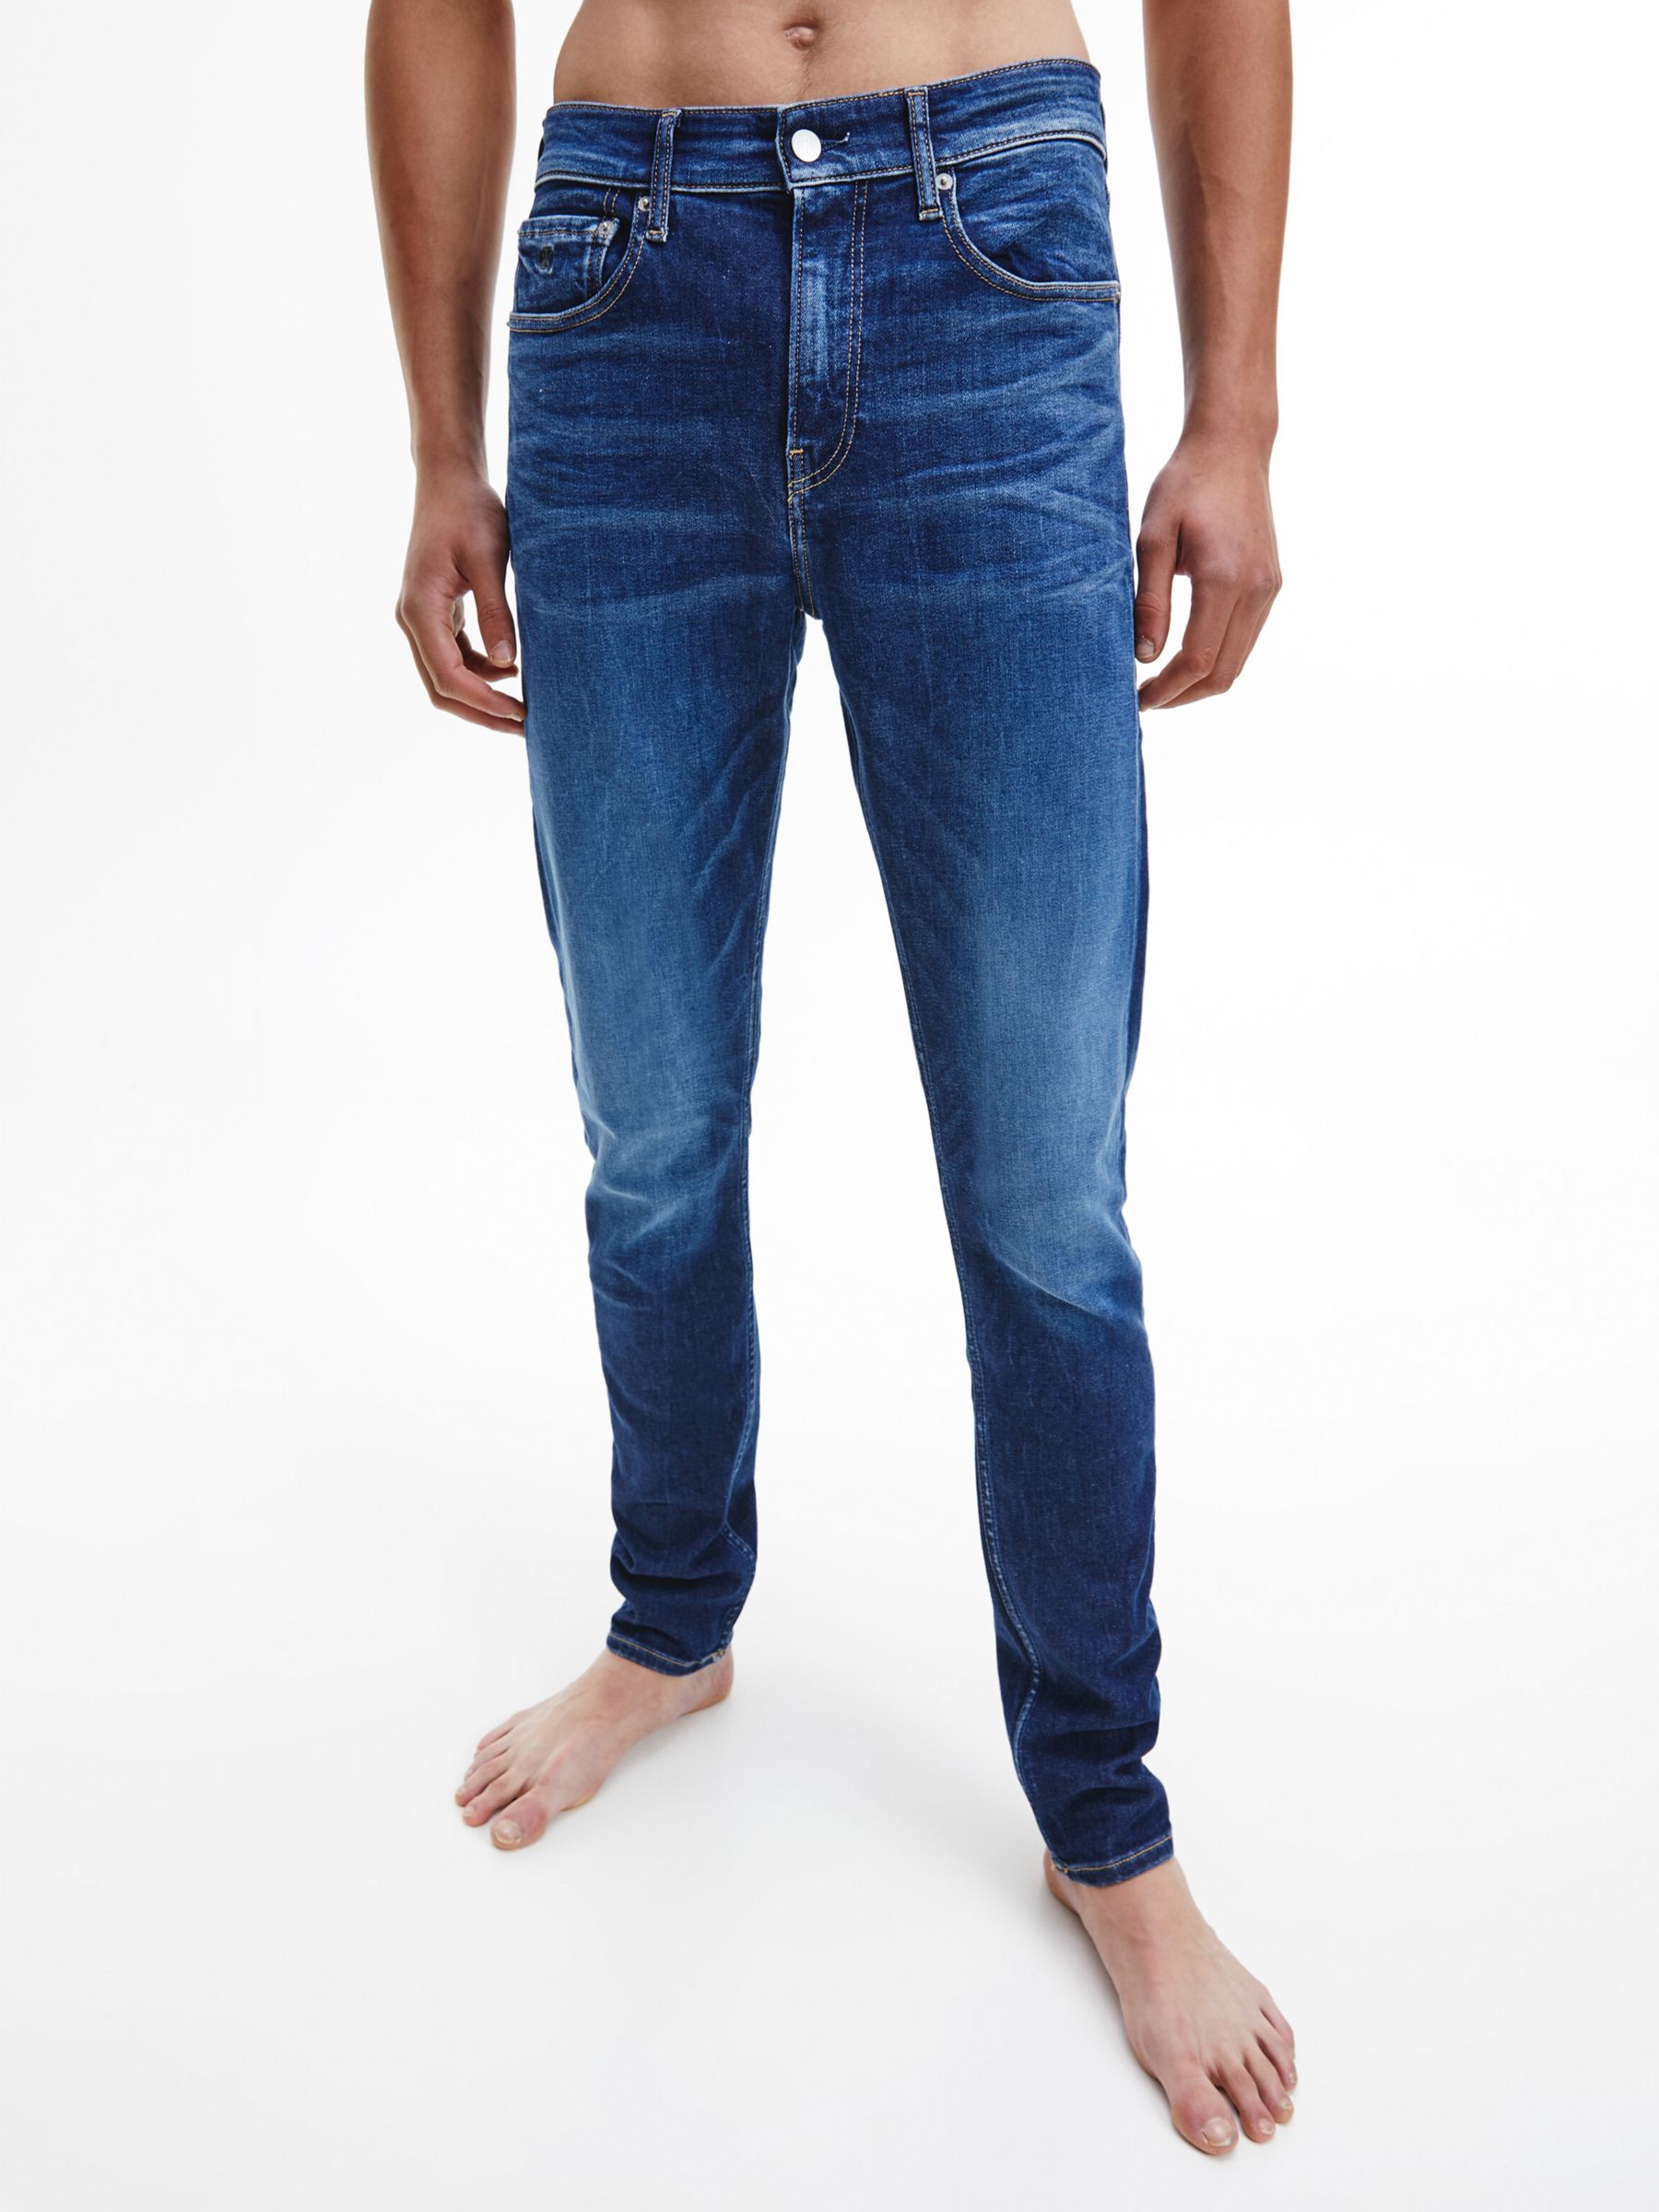 Men's Jeans Buying Guide